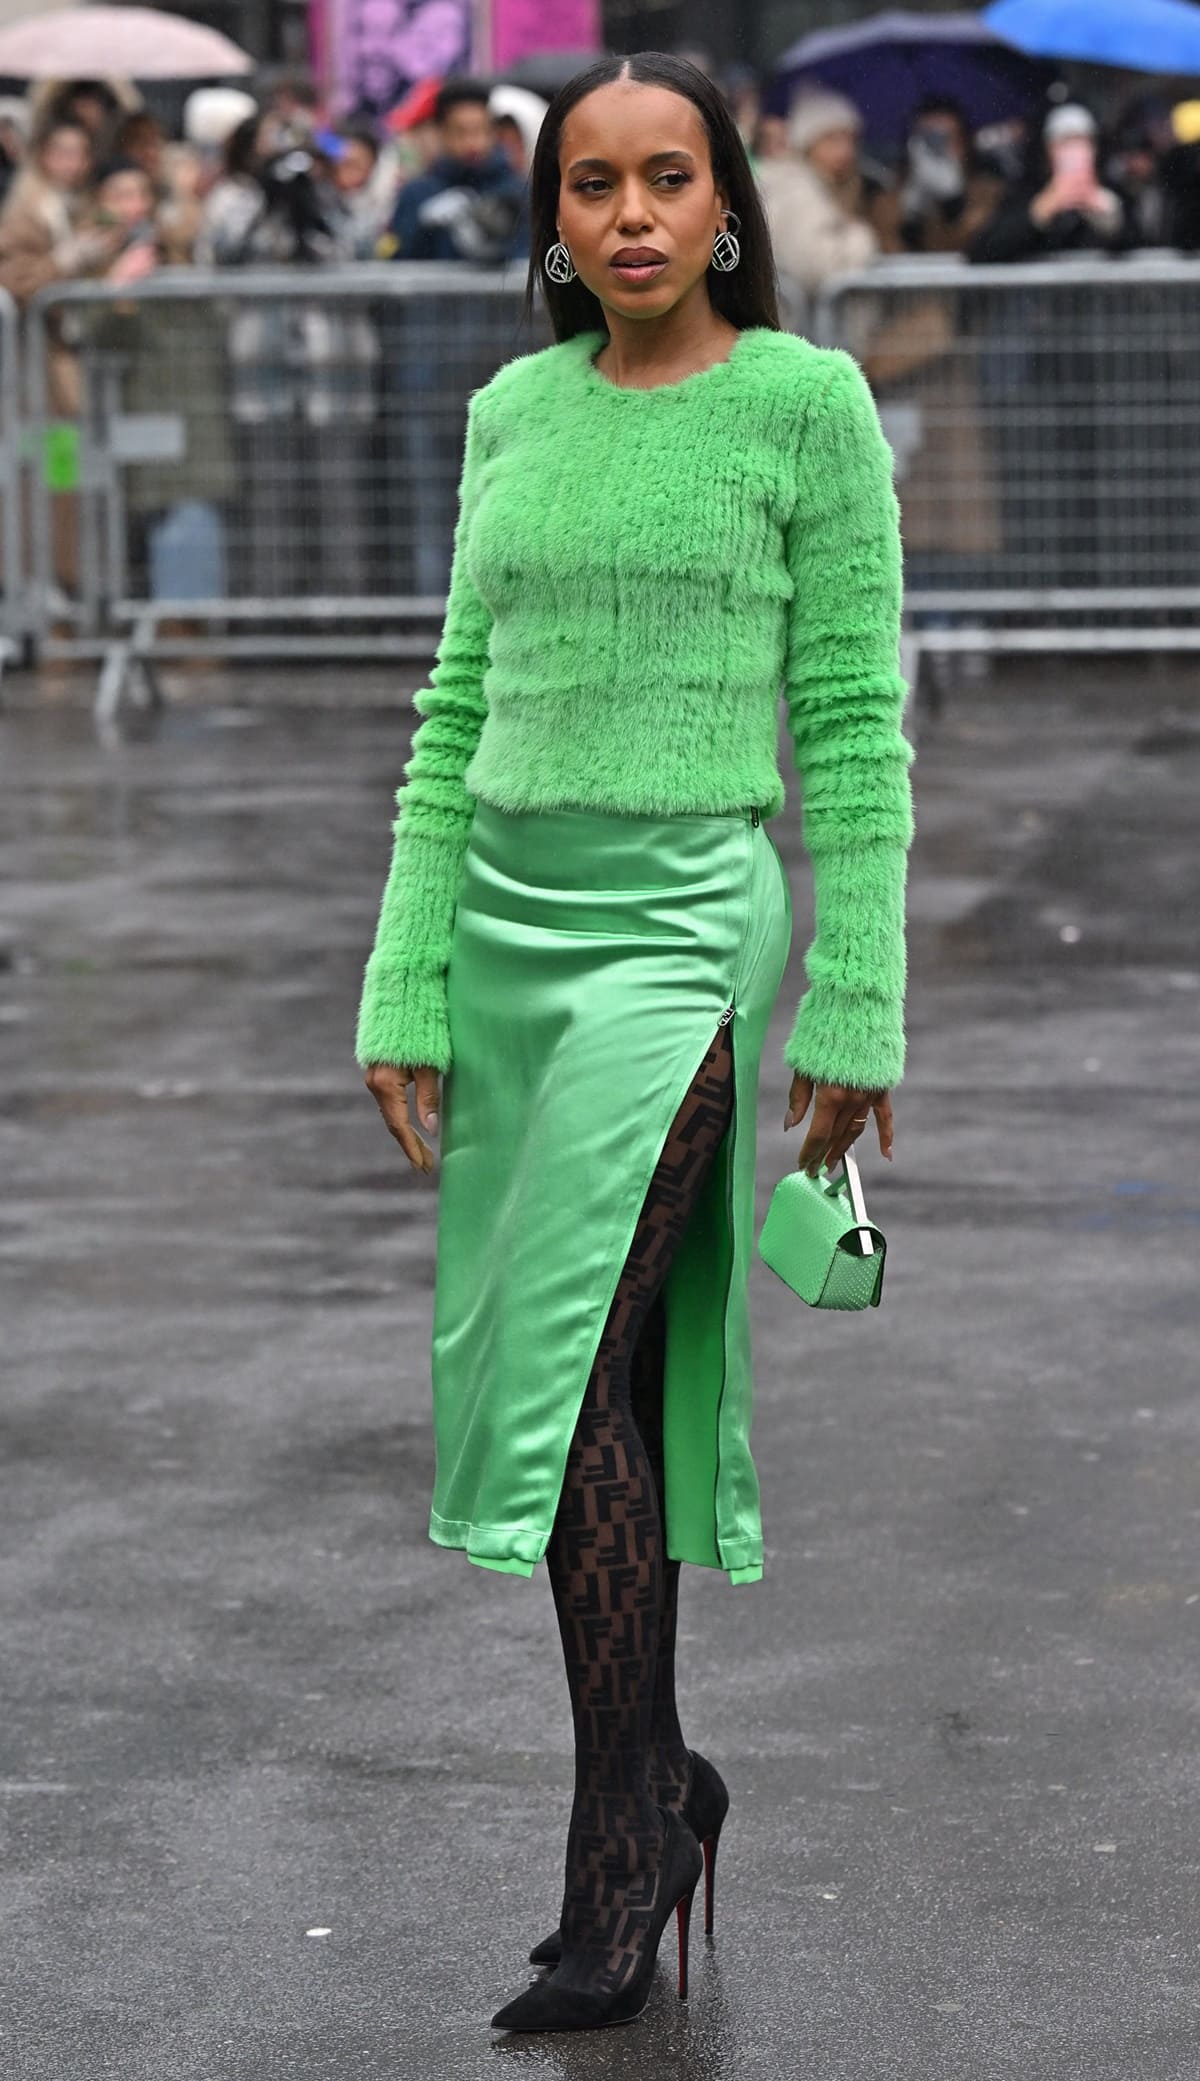 Kerry Washington wears a green outfit with black Fendi tights, large statement earrings, and a green mini bag for the Fendi Couture fashion show